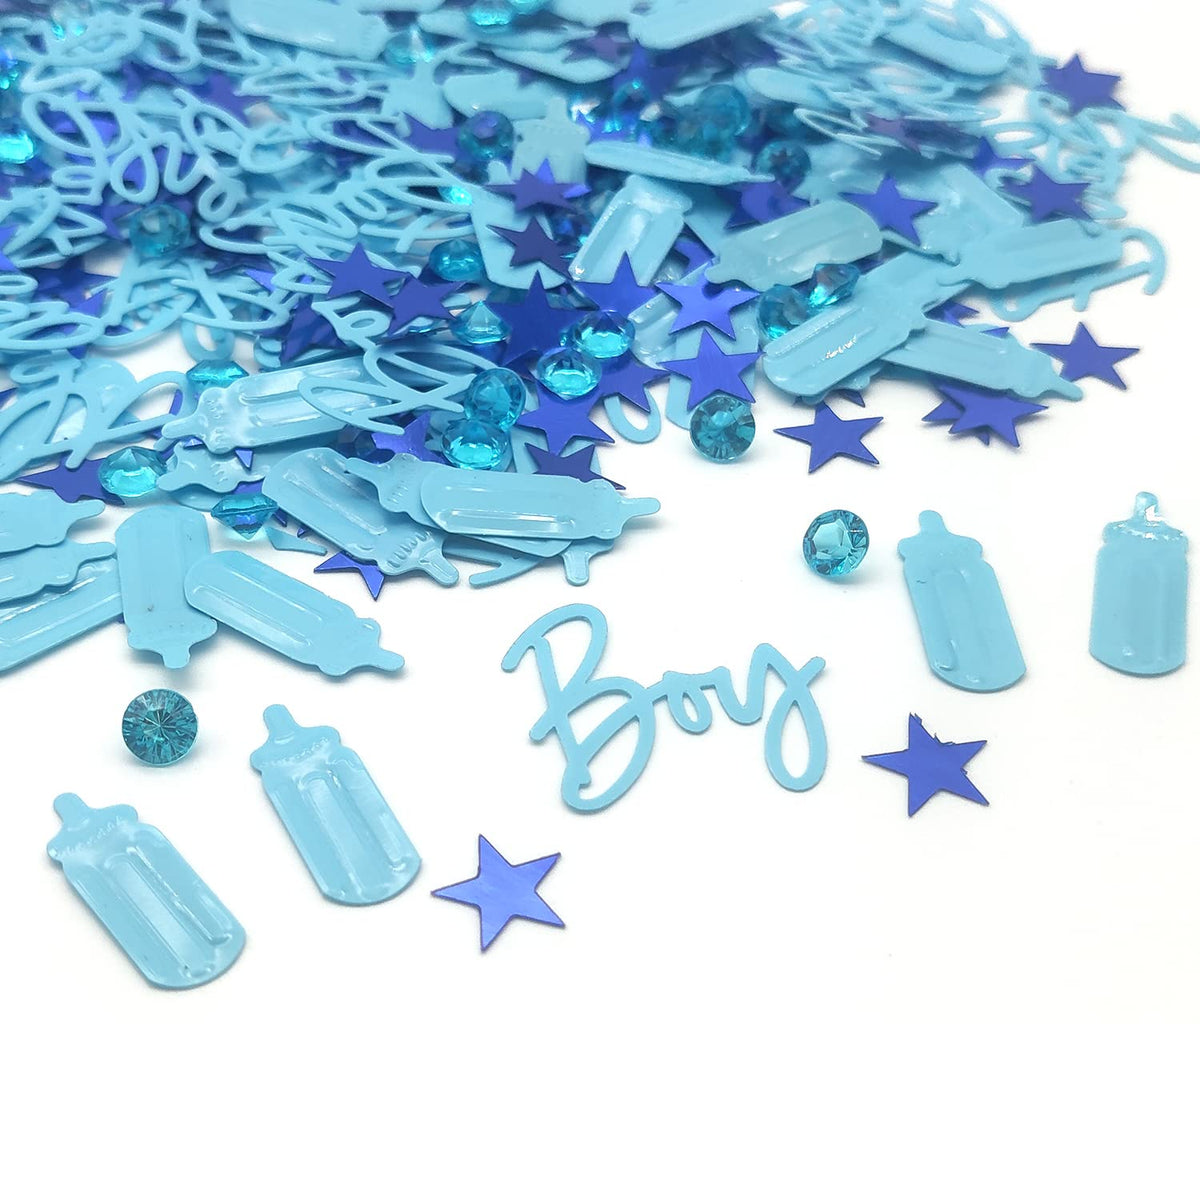 Baby Shower Confetti - Its A Boy, Glitter Confetti Sprinkles for Birthday Party Table Scatters Decoration, Table Scatter Confetti Baby Gender Reveal Jungle Birthday Decorations A3BSZX (boy)